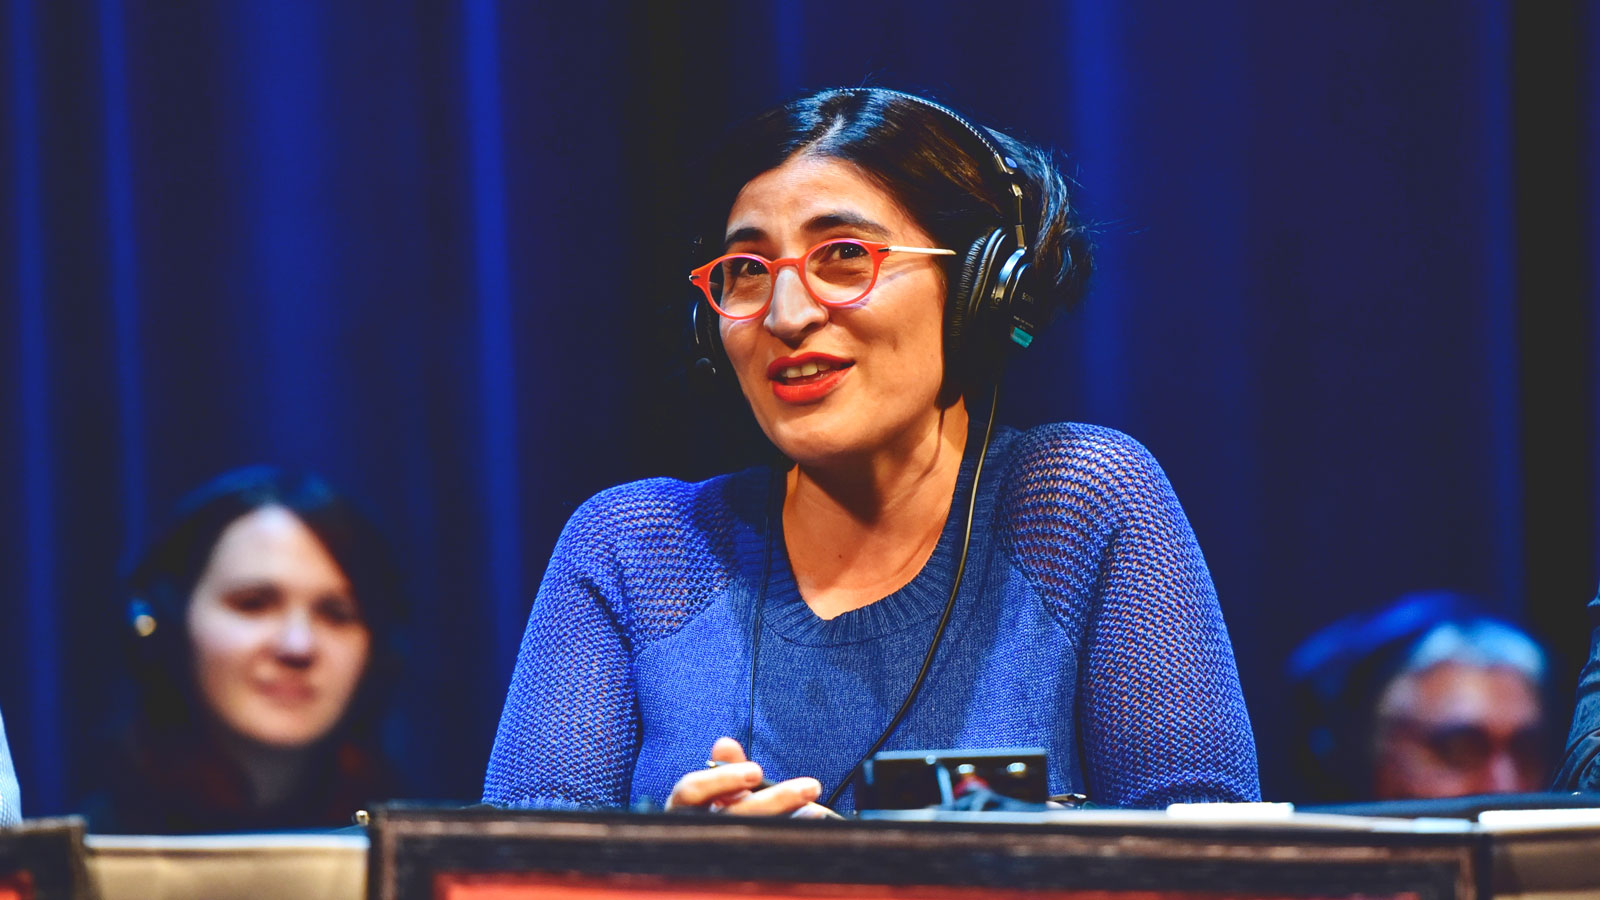 Comedian Negin Farsad wearing a blue dress, red glasses and a pair of headphones on a live radio program